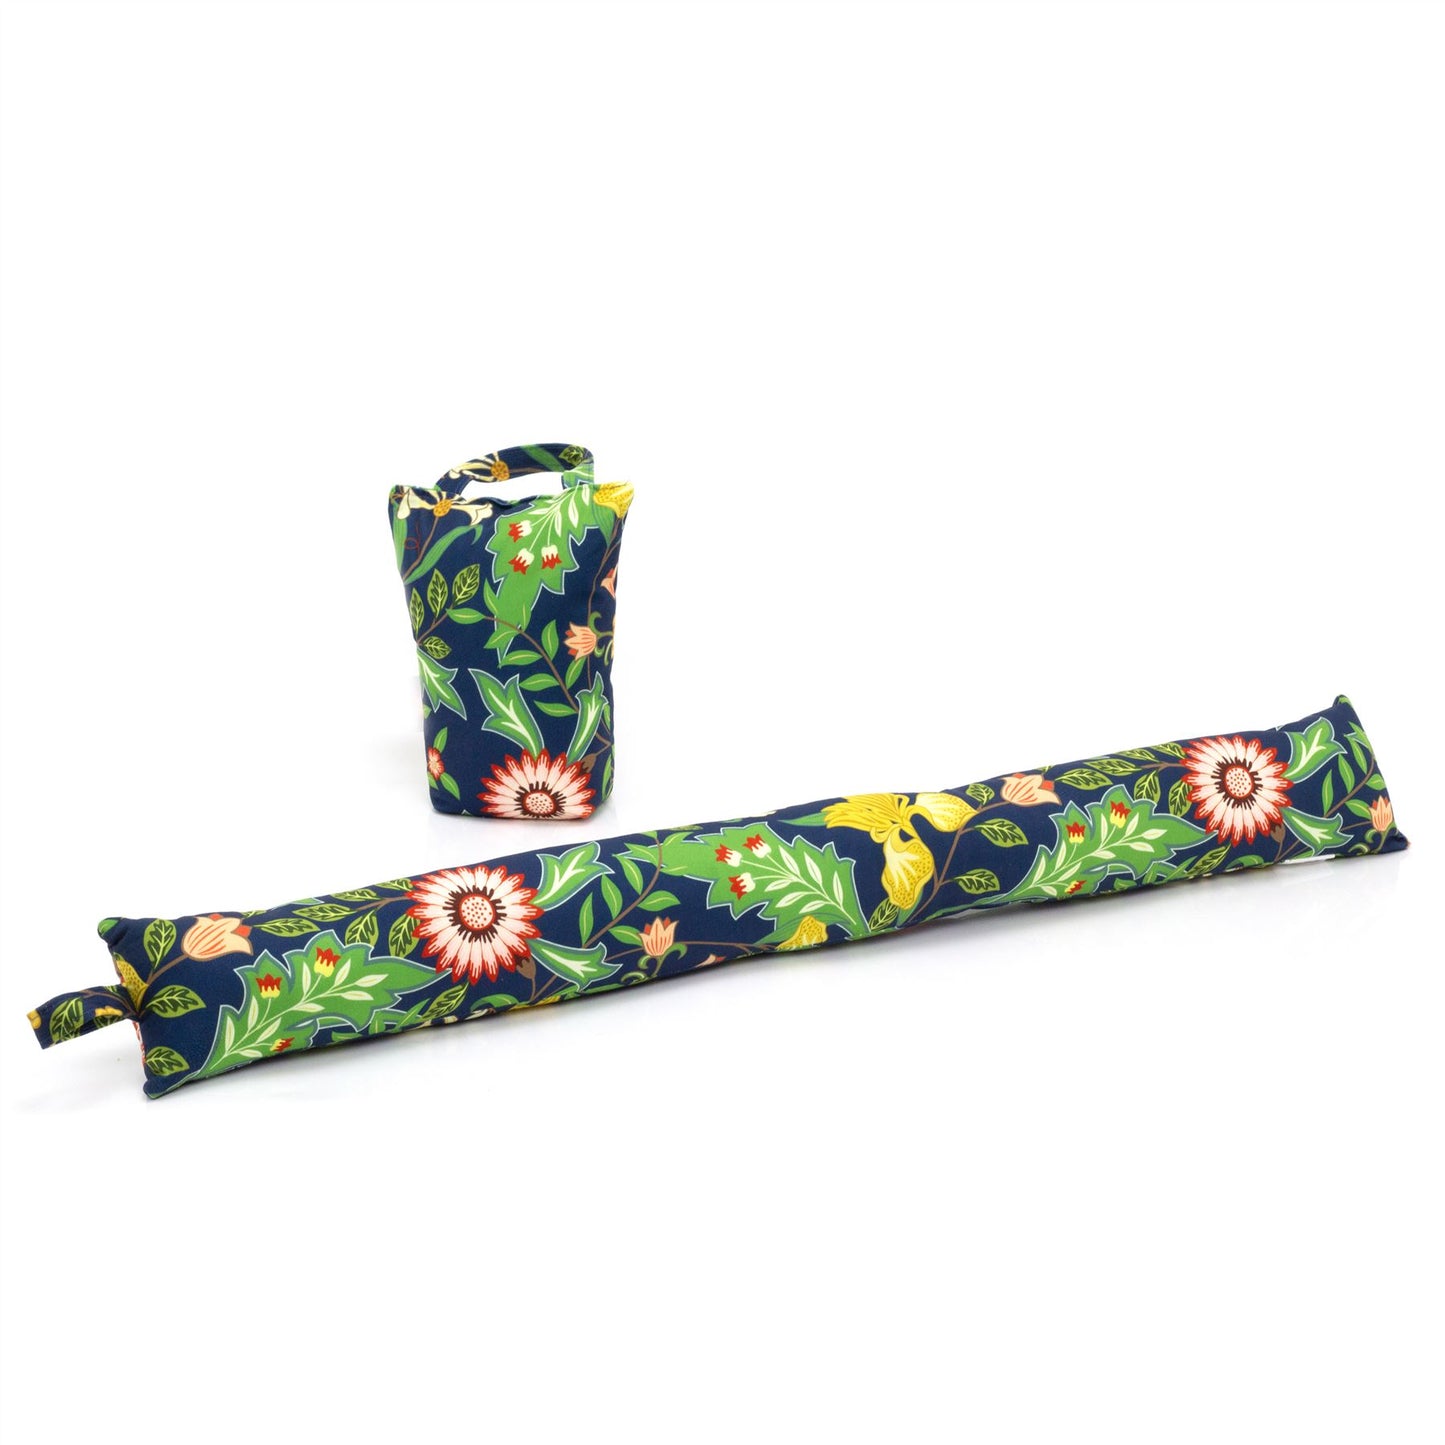 2 Piece Sussex Floral Doorstop And Draught Excluder | Decorative Fabric Door Stop With Draft Excluder | Floral Draught Excluder & Doorstopper - Blue